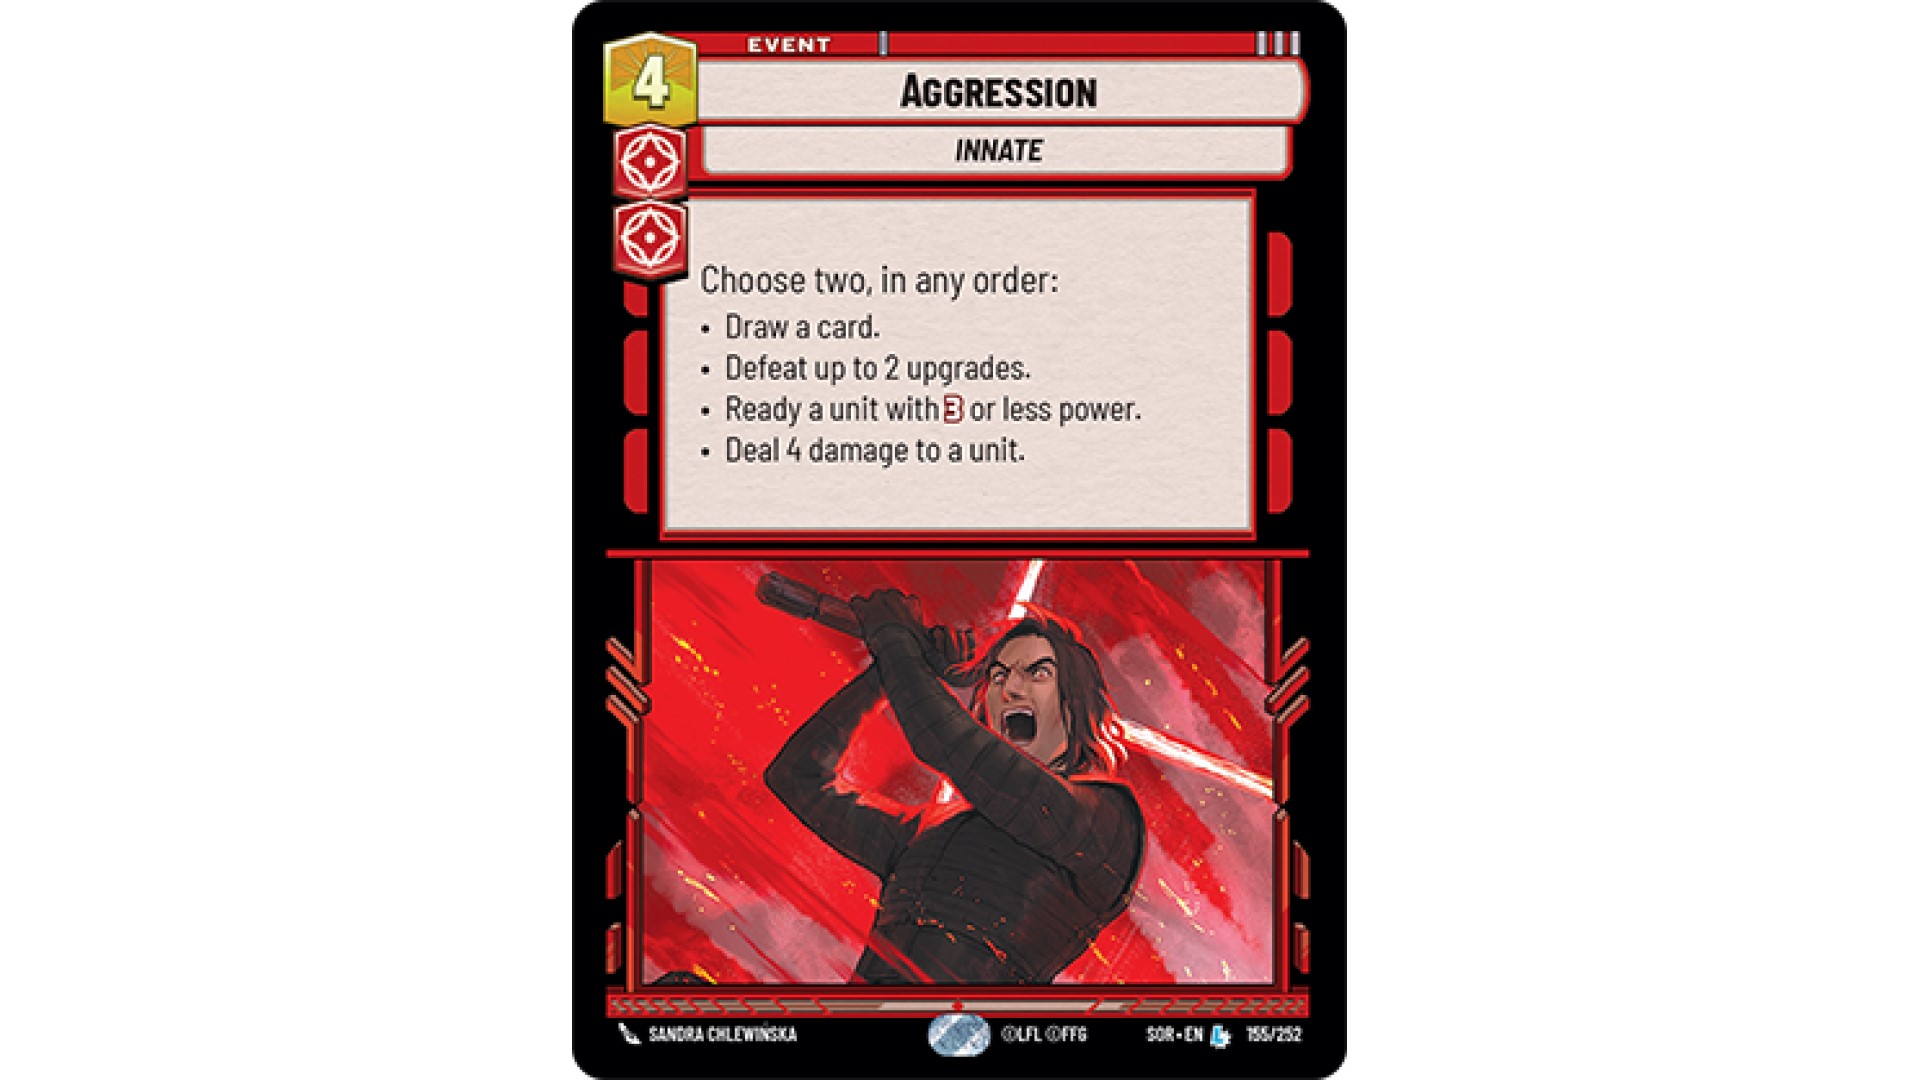 Exclusive: Star Wars Unlimited card reveals for Aggression aspect